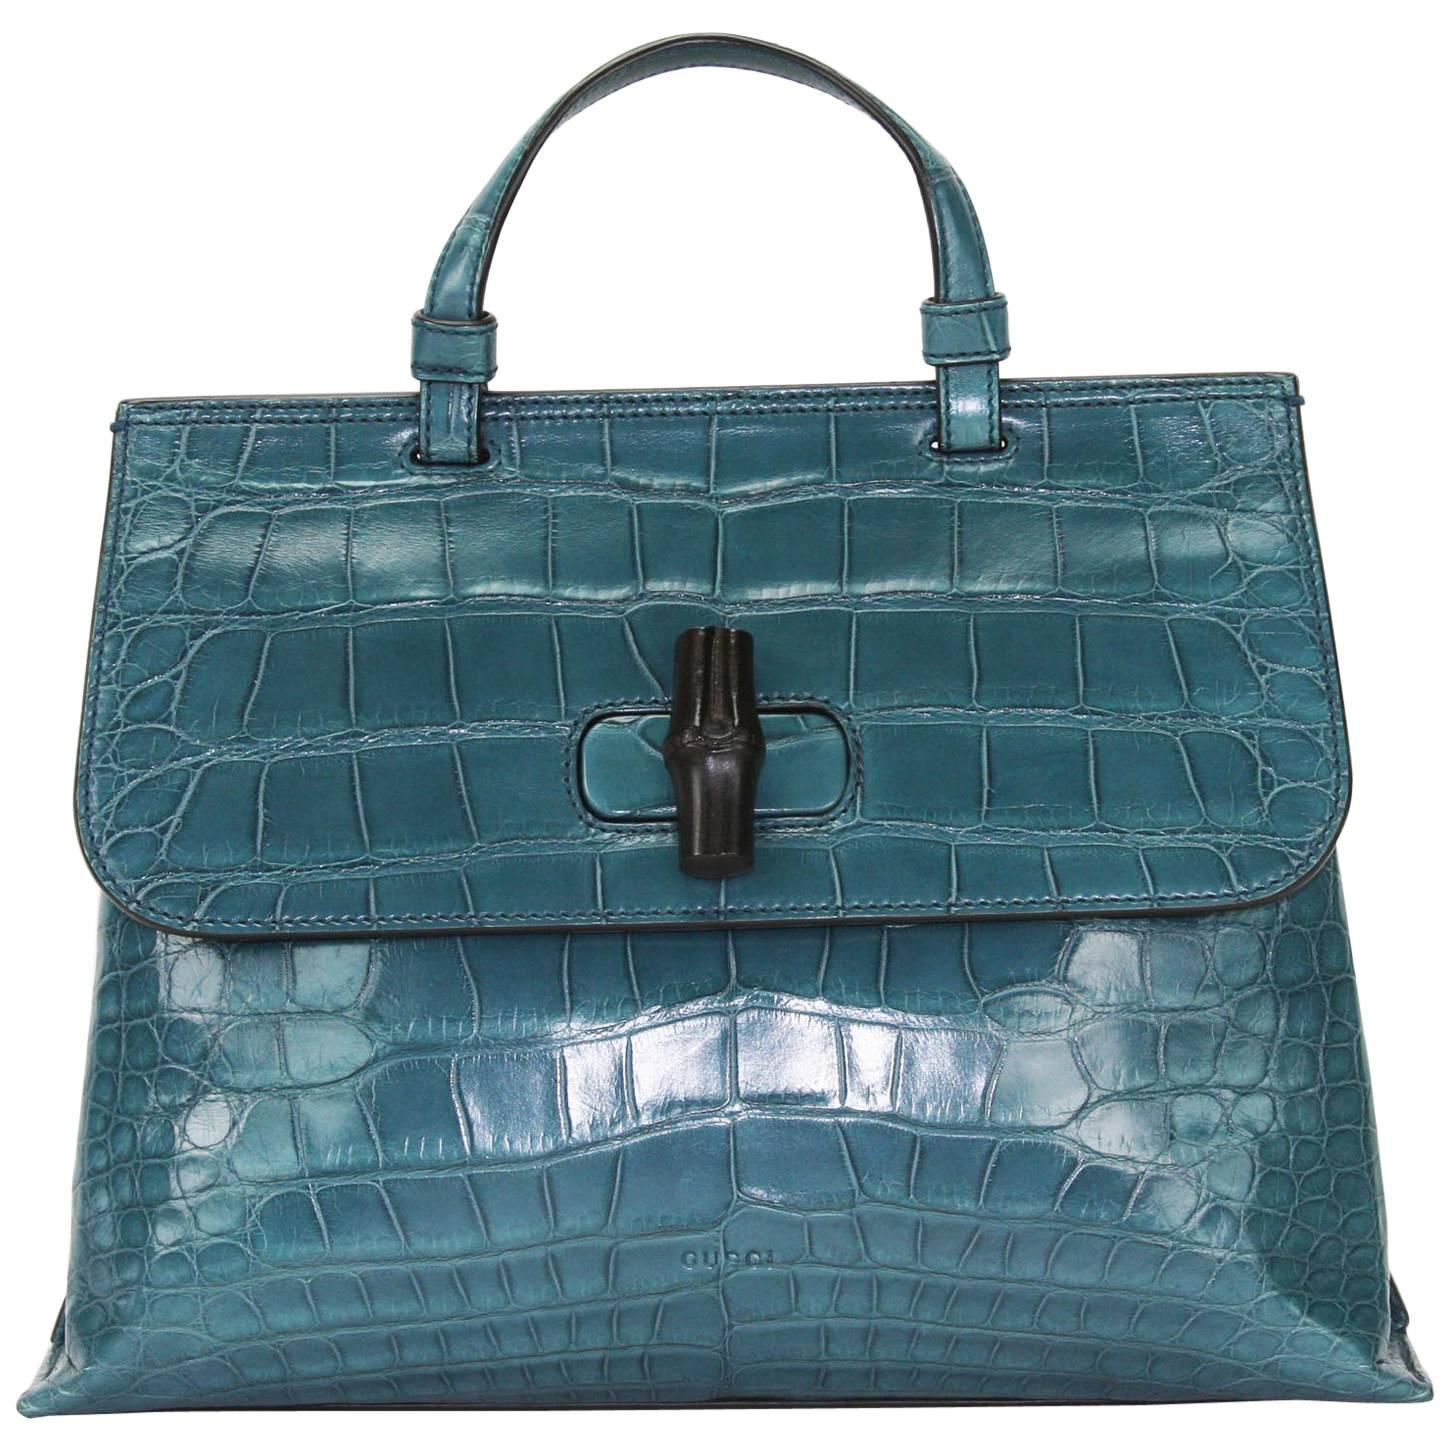 New $24.000 Gucci Crocodile Dusty Turquoise Top Handle Shoulder Strap Medium Bag For Sale